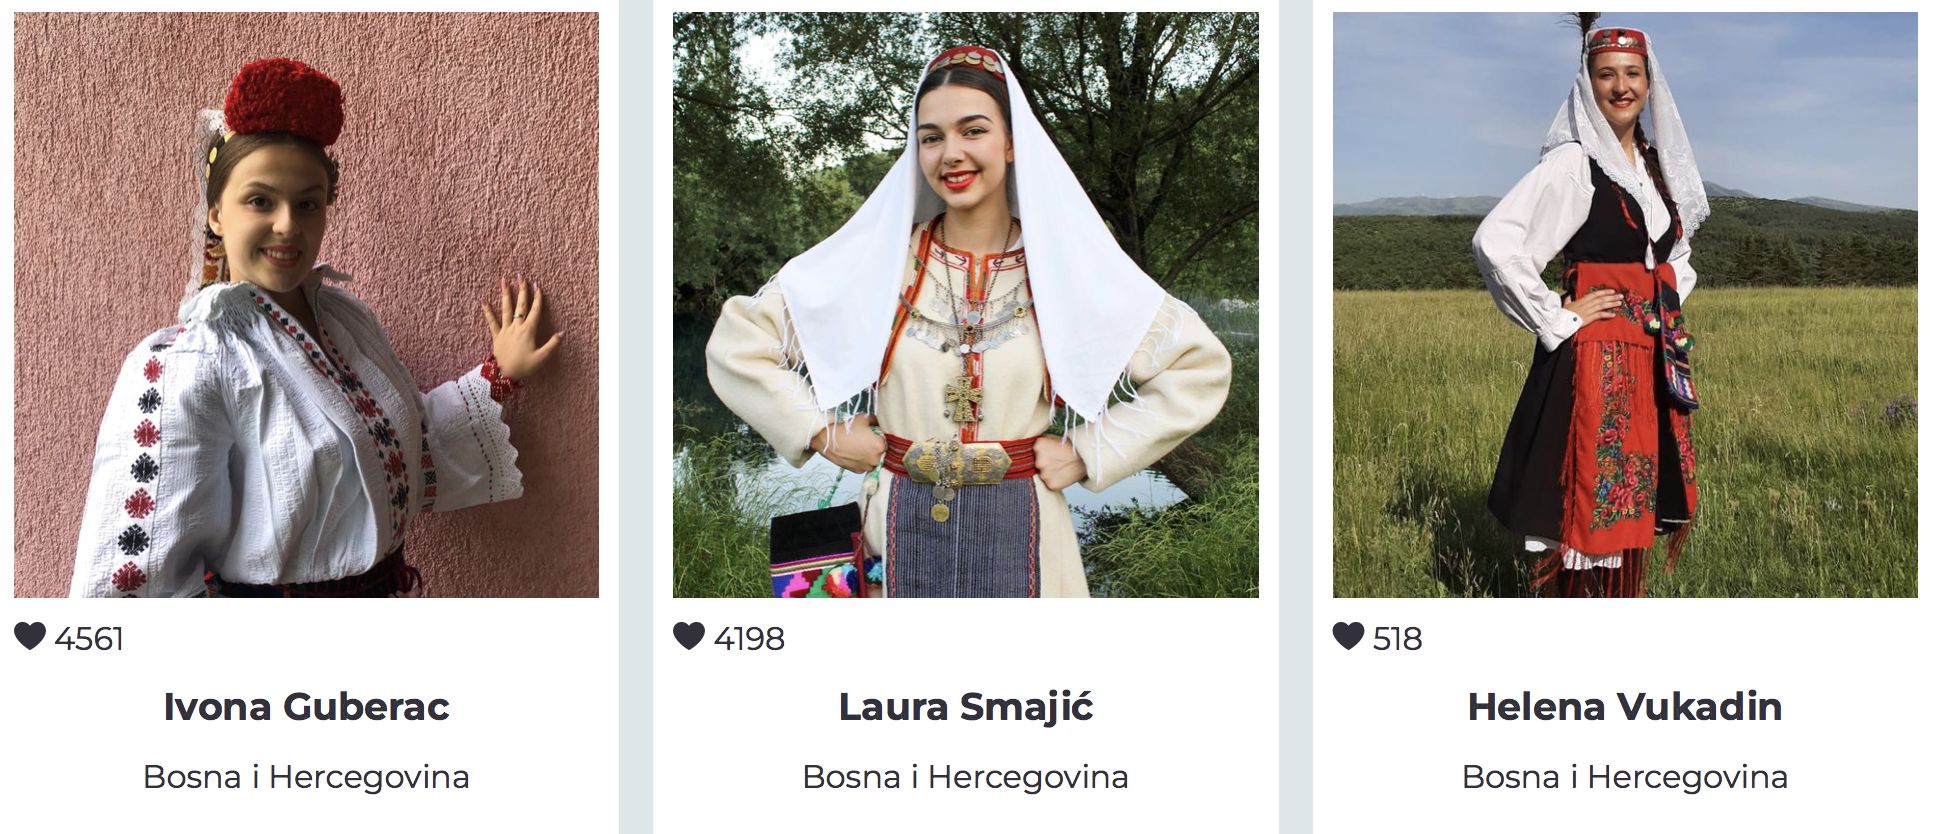 The most beautiful Croatian in folk costume abroad will be selected - applicants 